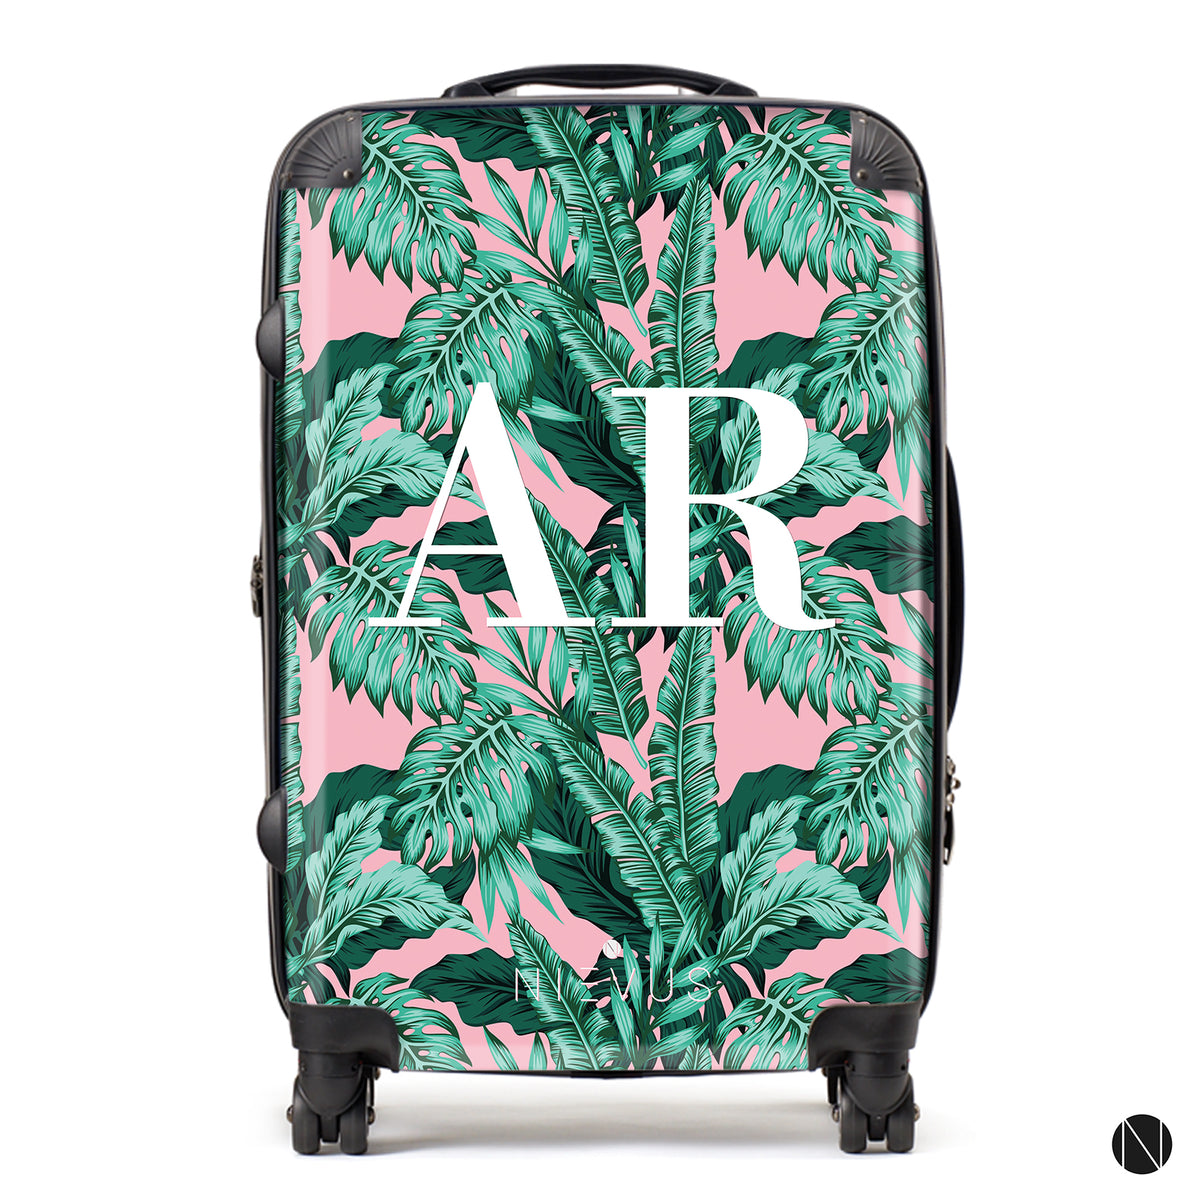 The Personalised Palms Suitcase - Retro Edition